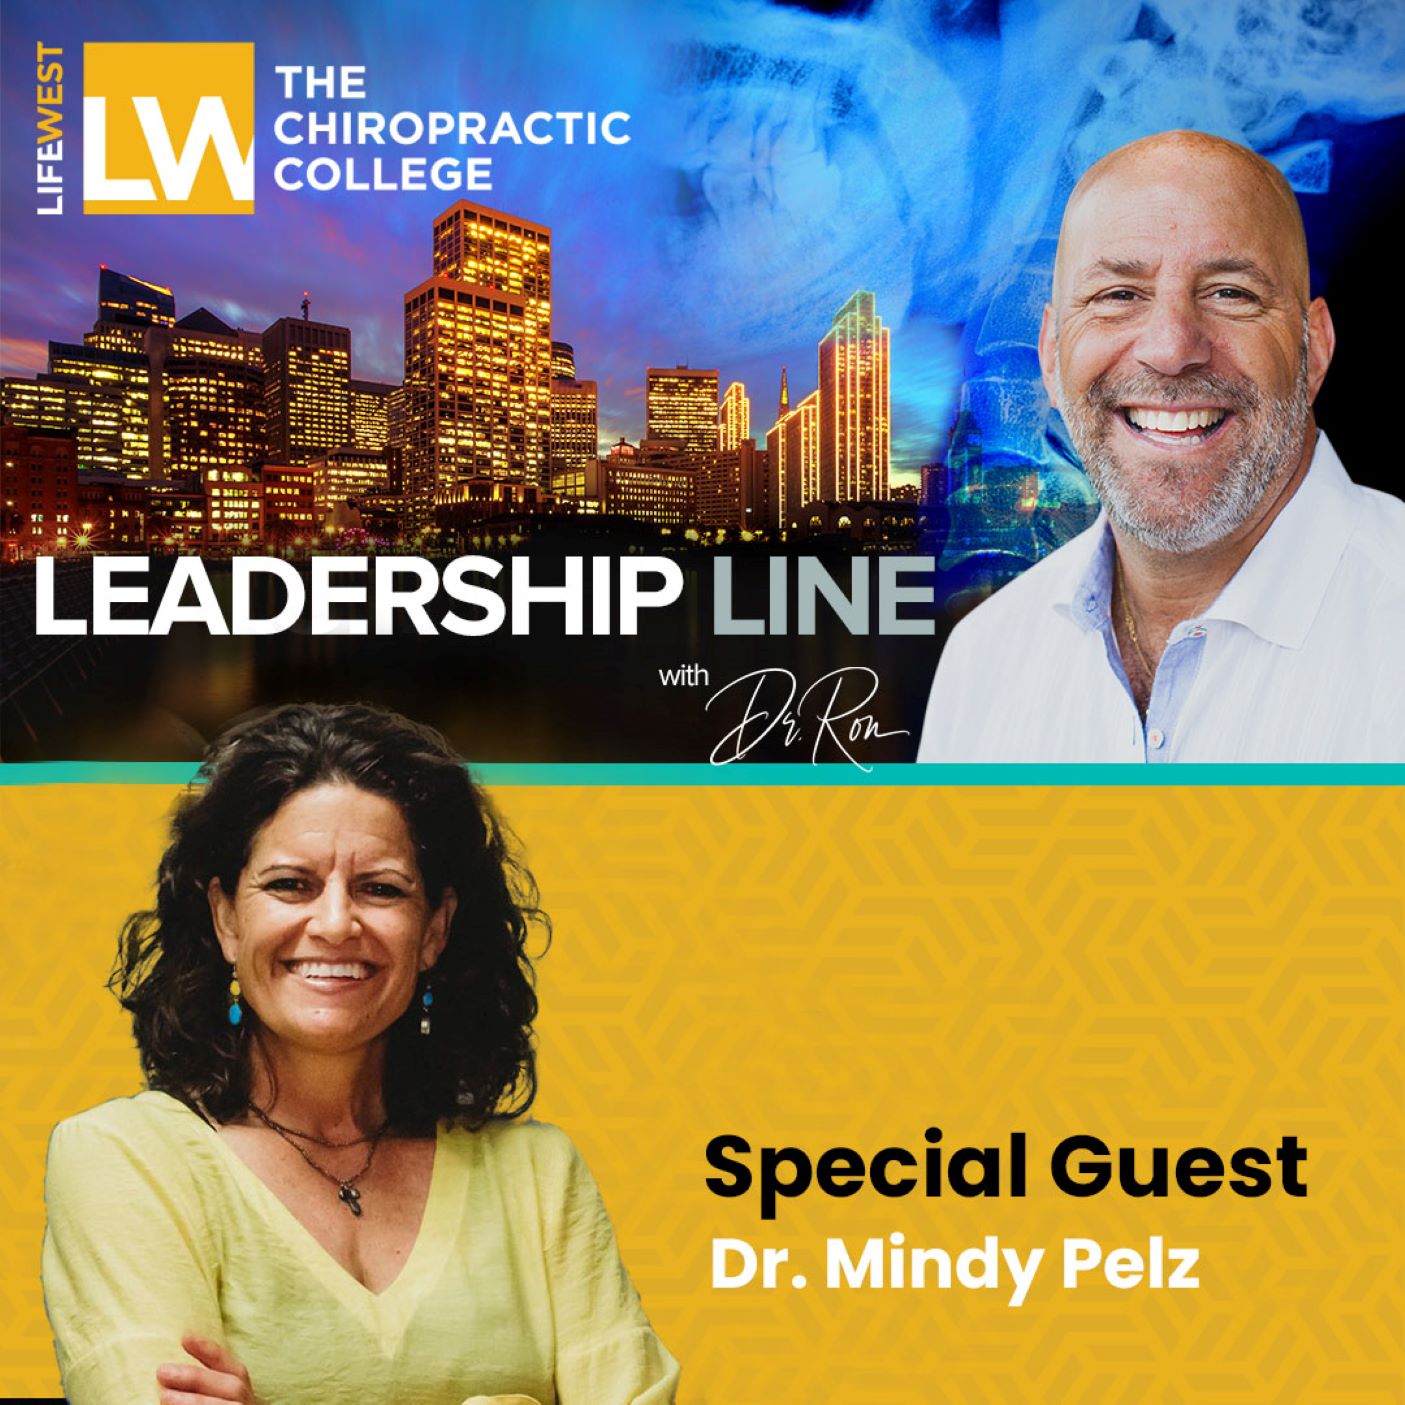 S3 Ep5 Working With the Body From Within for Maximum Healing with Dr. Mindy Pelz